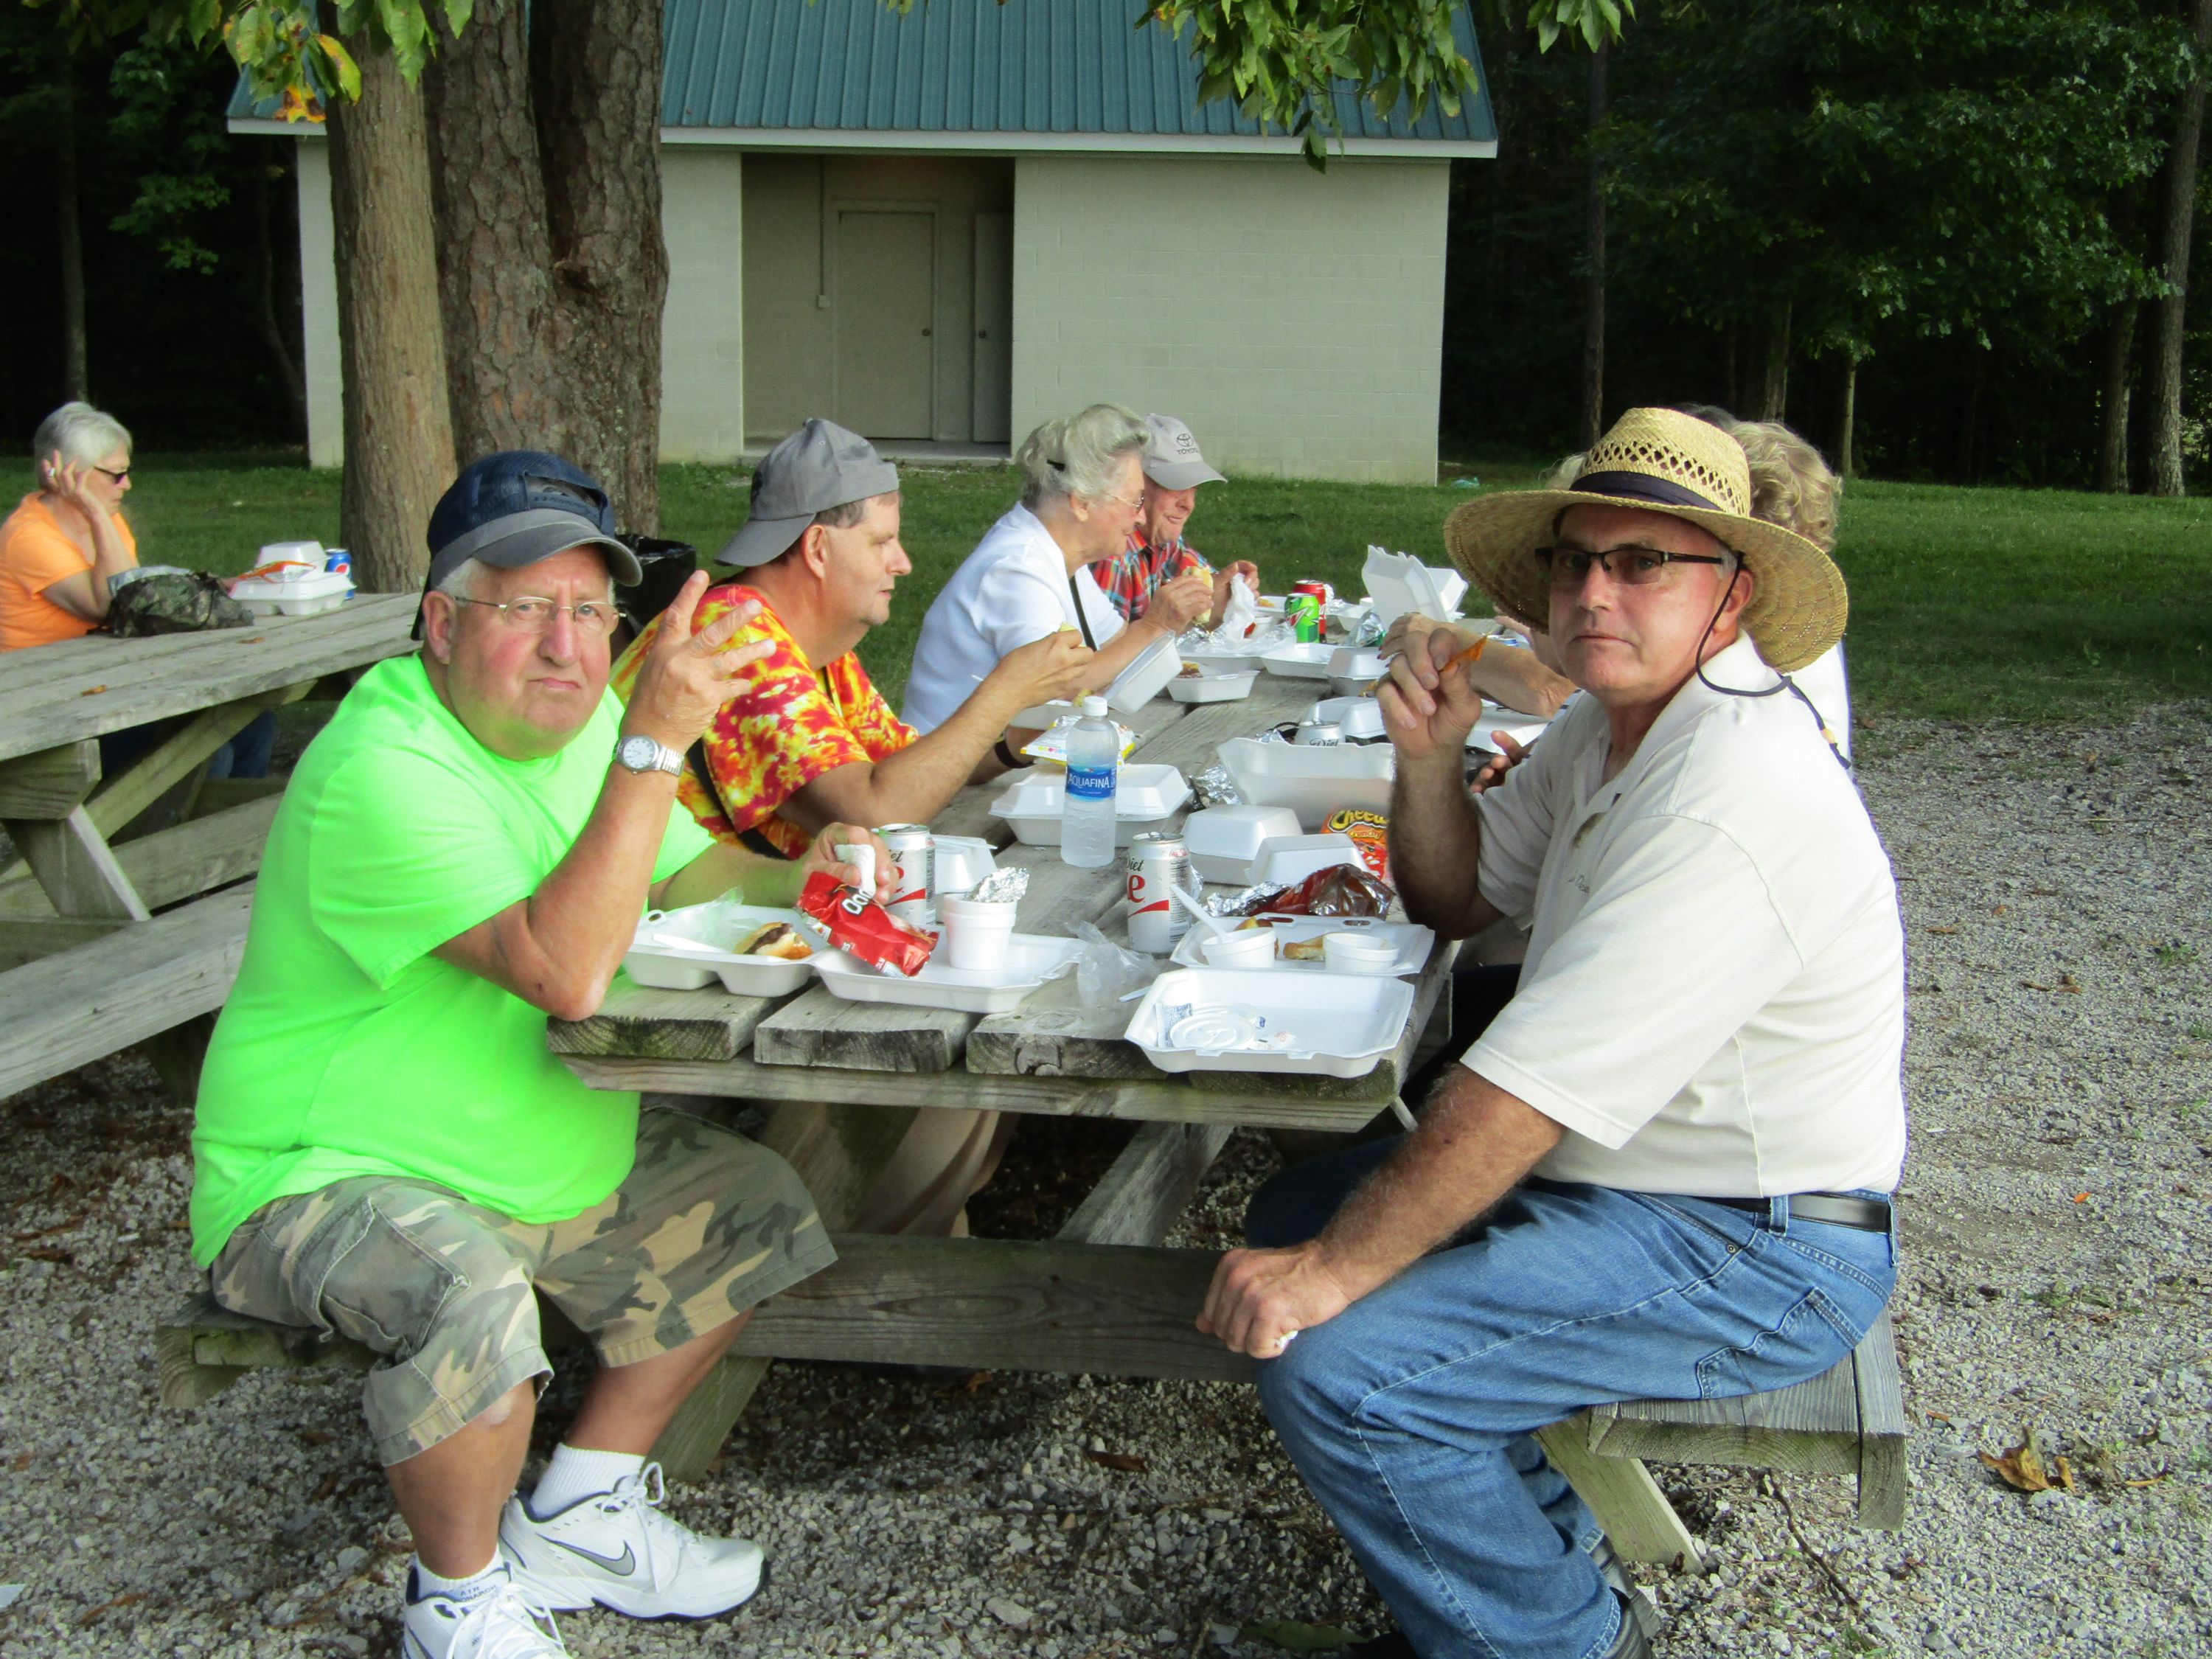 The Jackson County Farm Bureau Annual Meeting and Picnic was held on Monday, September 18th at the Jackson Energy Farm on Highway 290 in McKee.